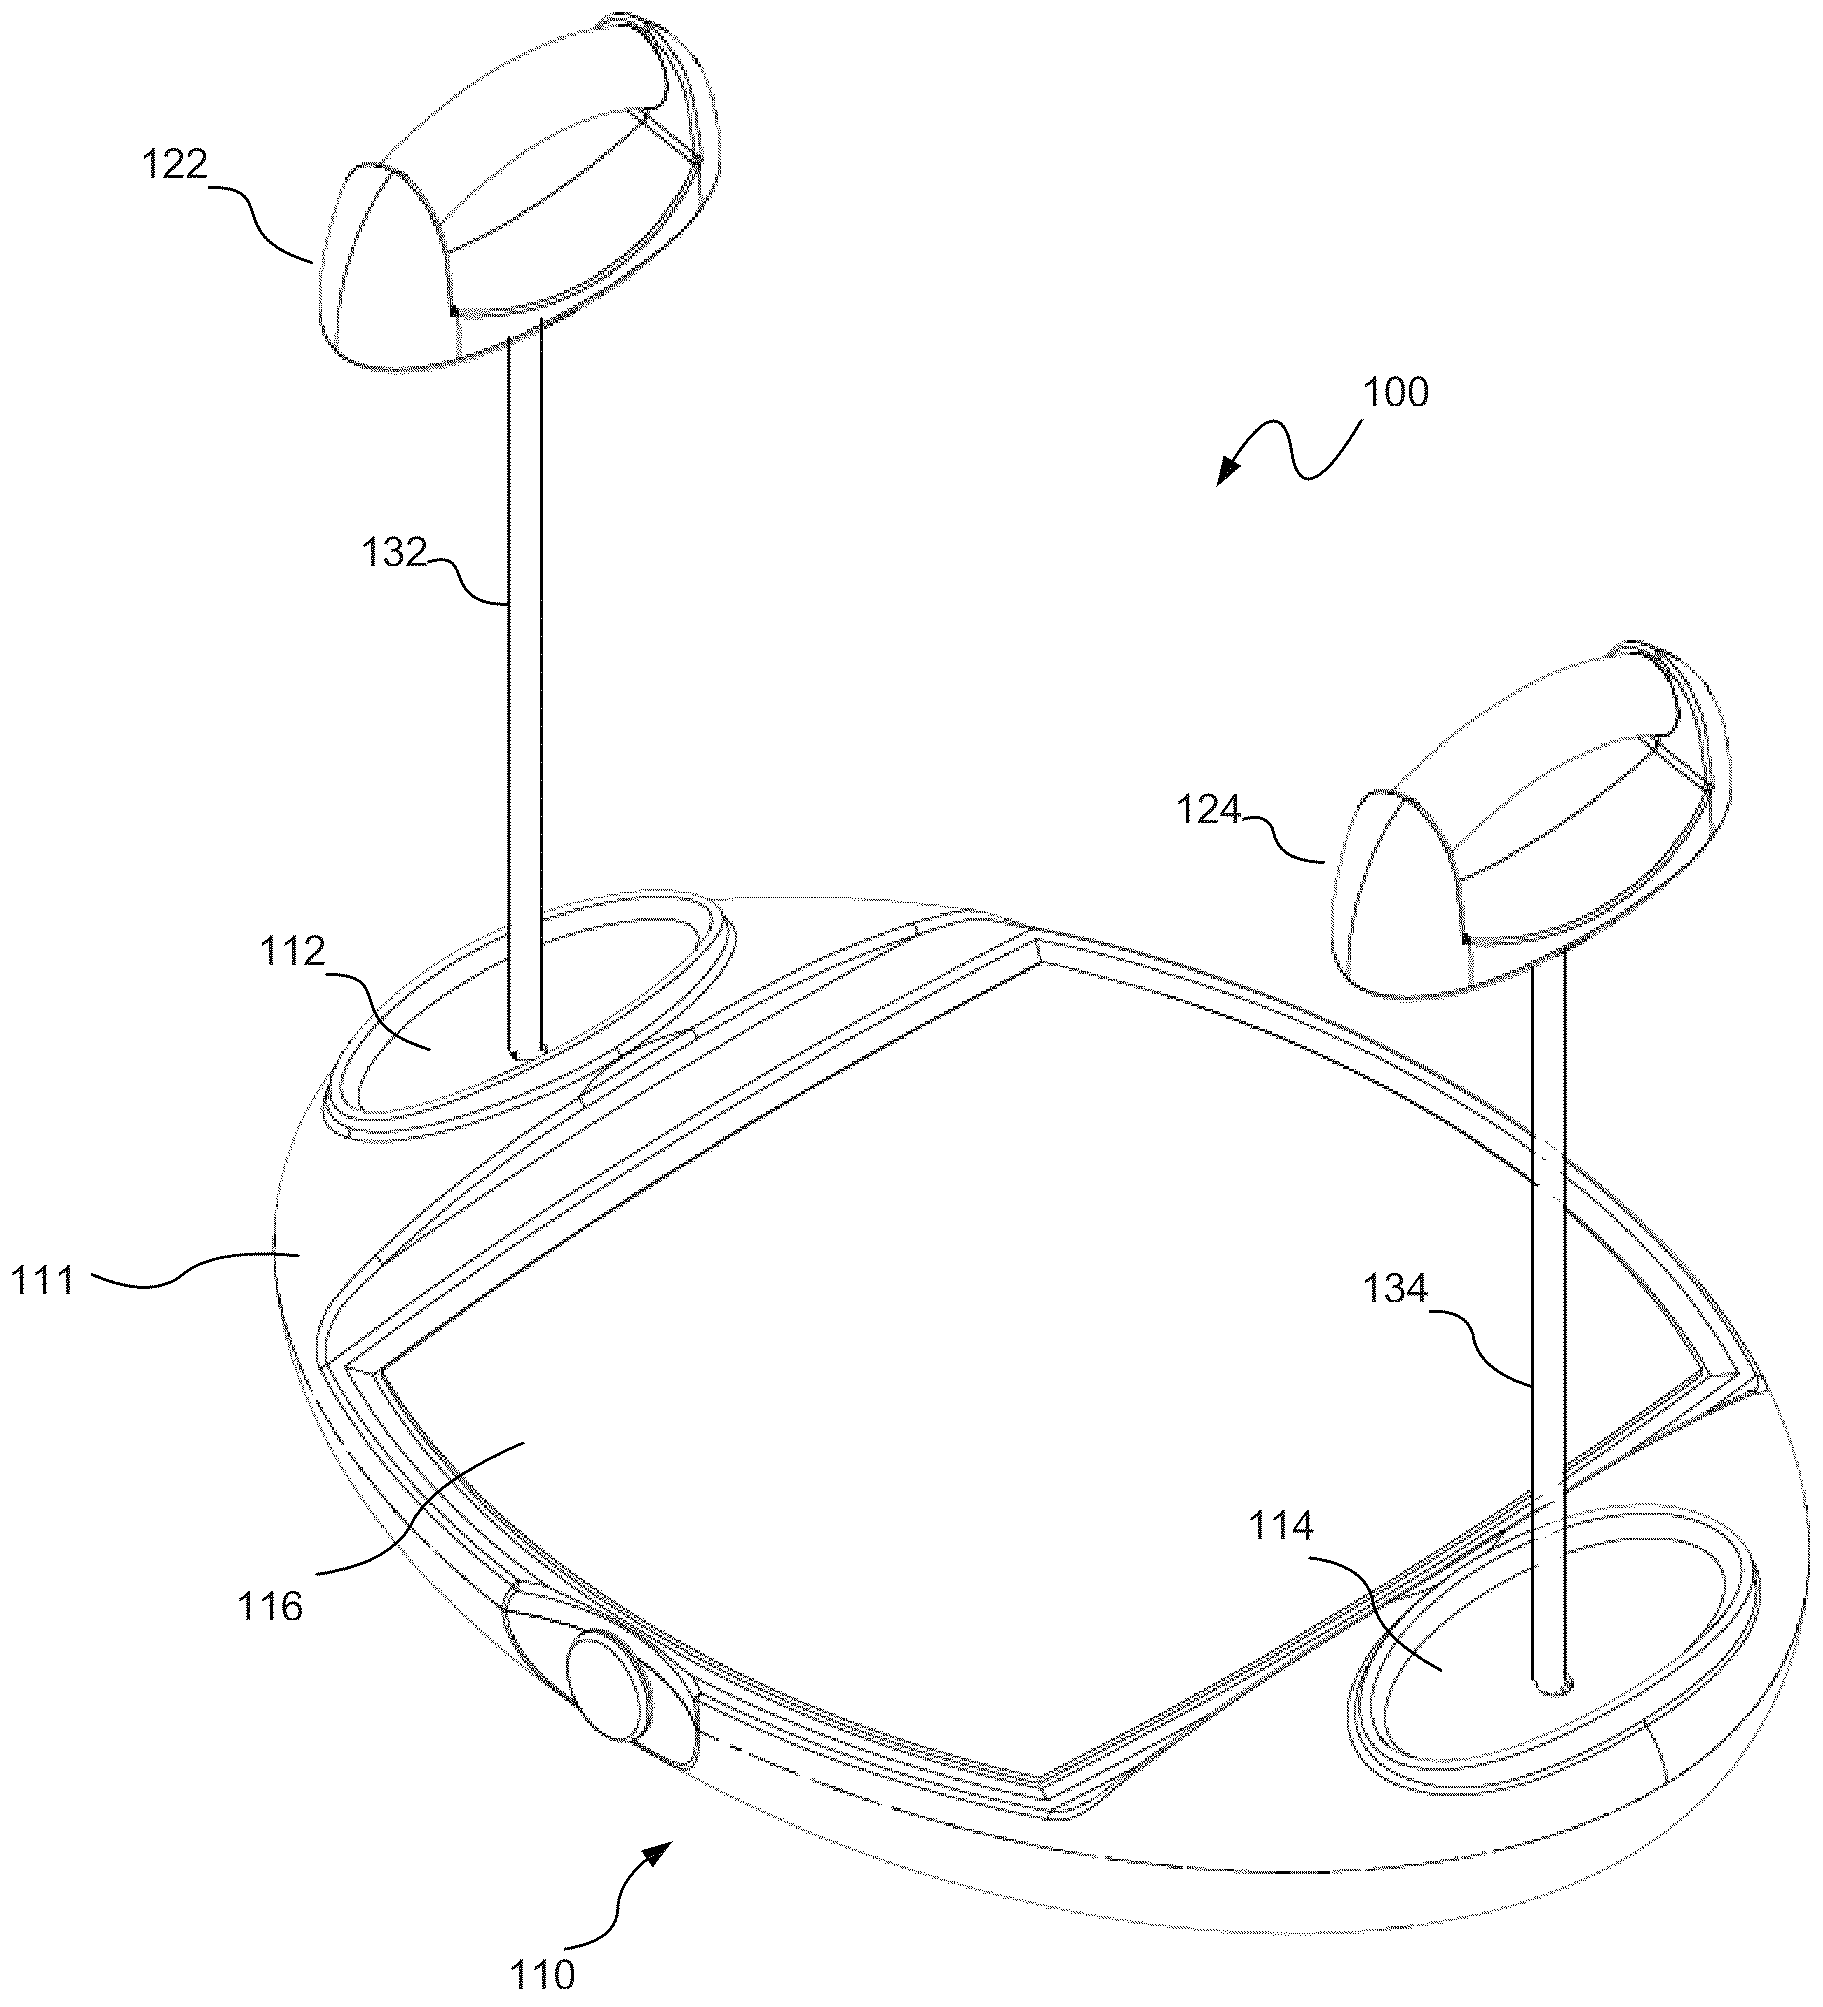 Adjustable resistance exercise device